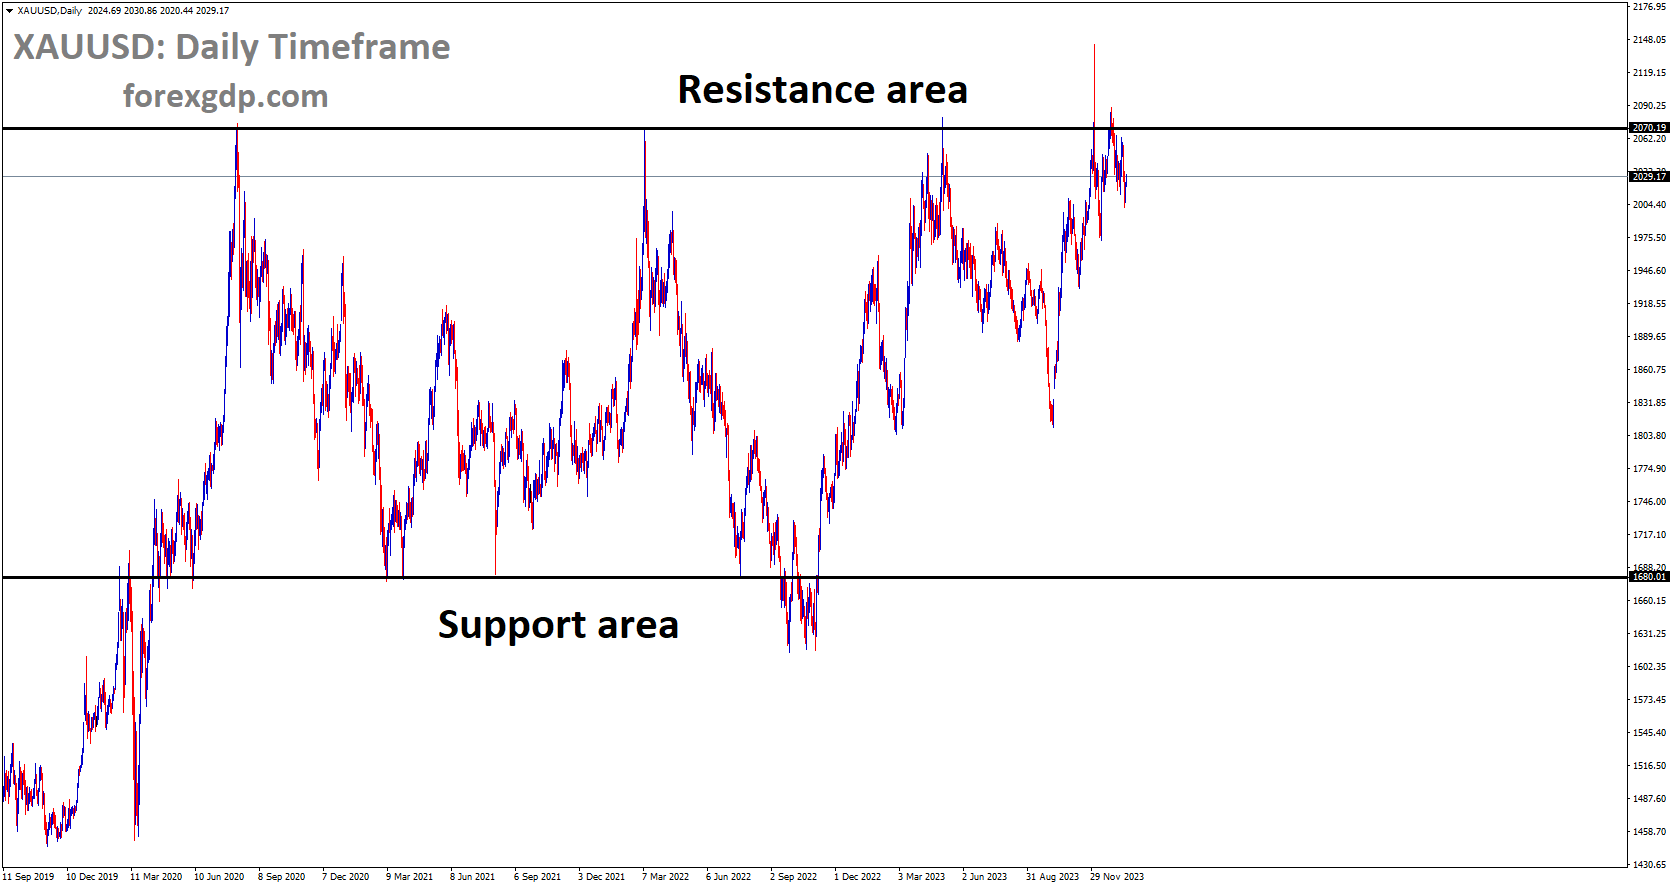 XAUUSD is moving in box pattern and market has fallen from the resistance area of the pattern